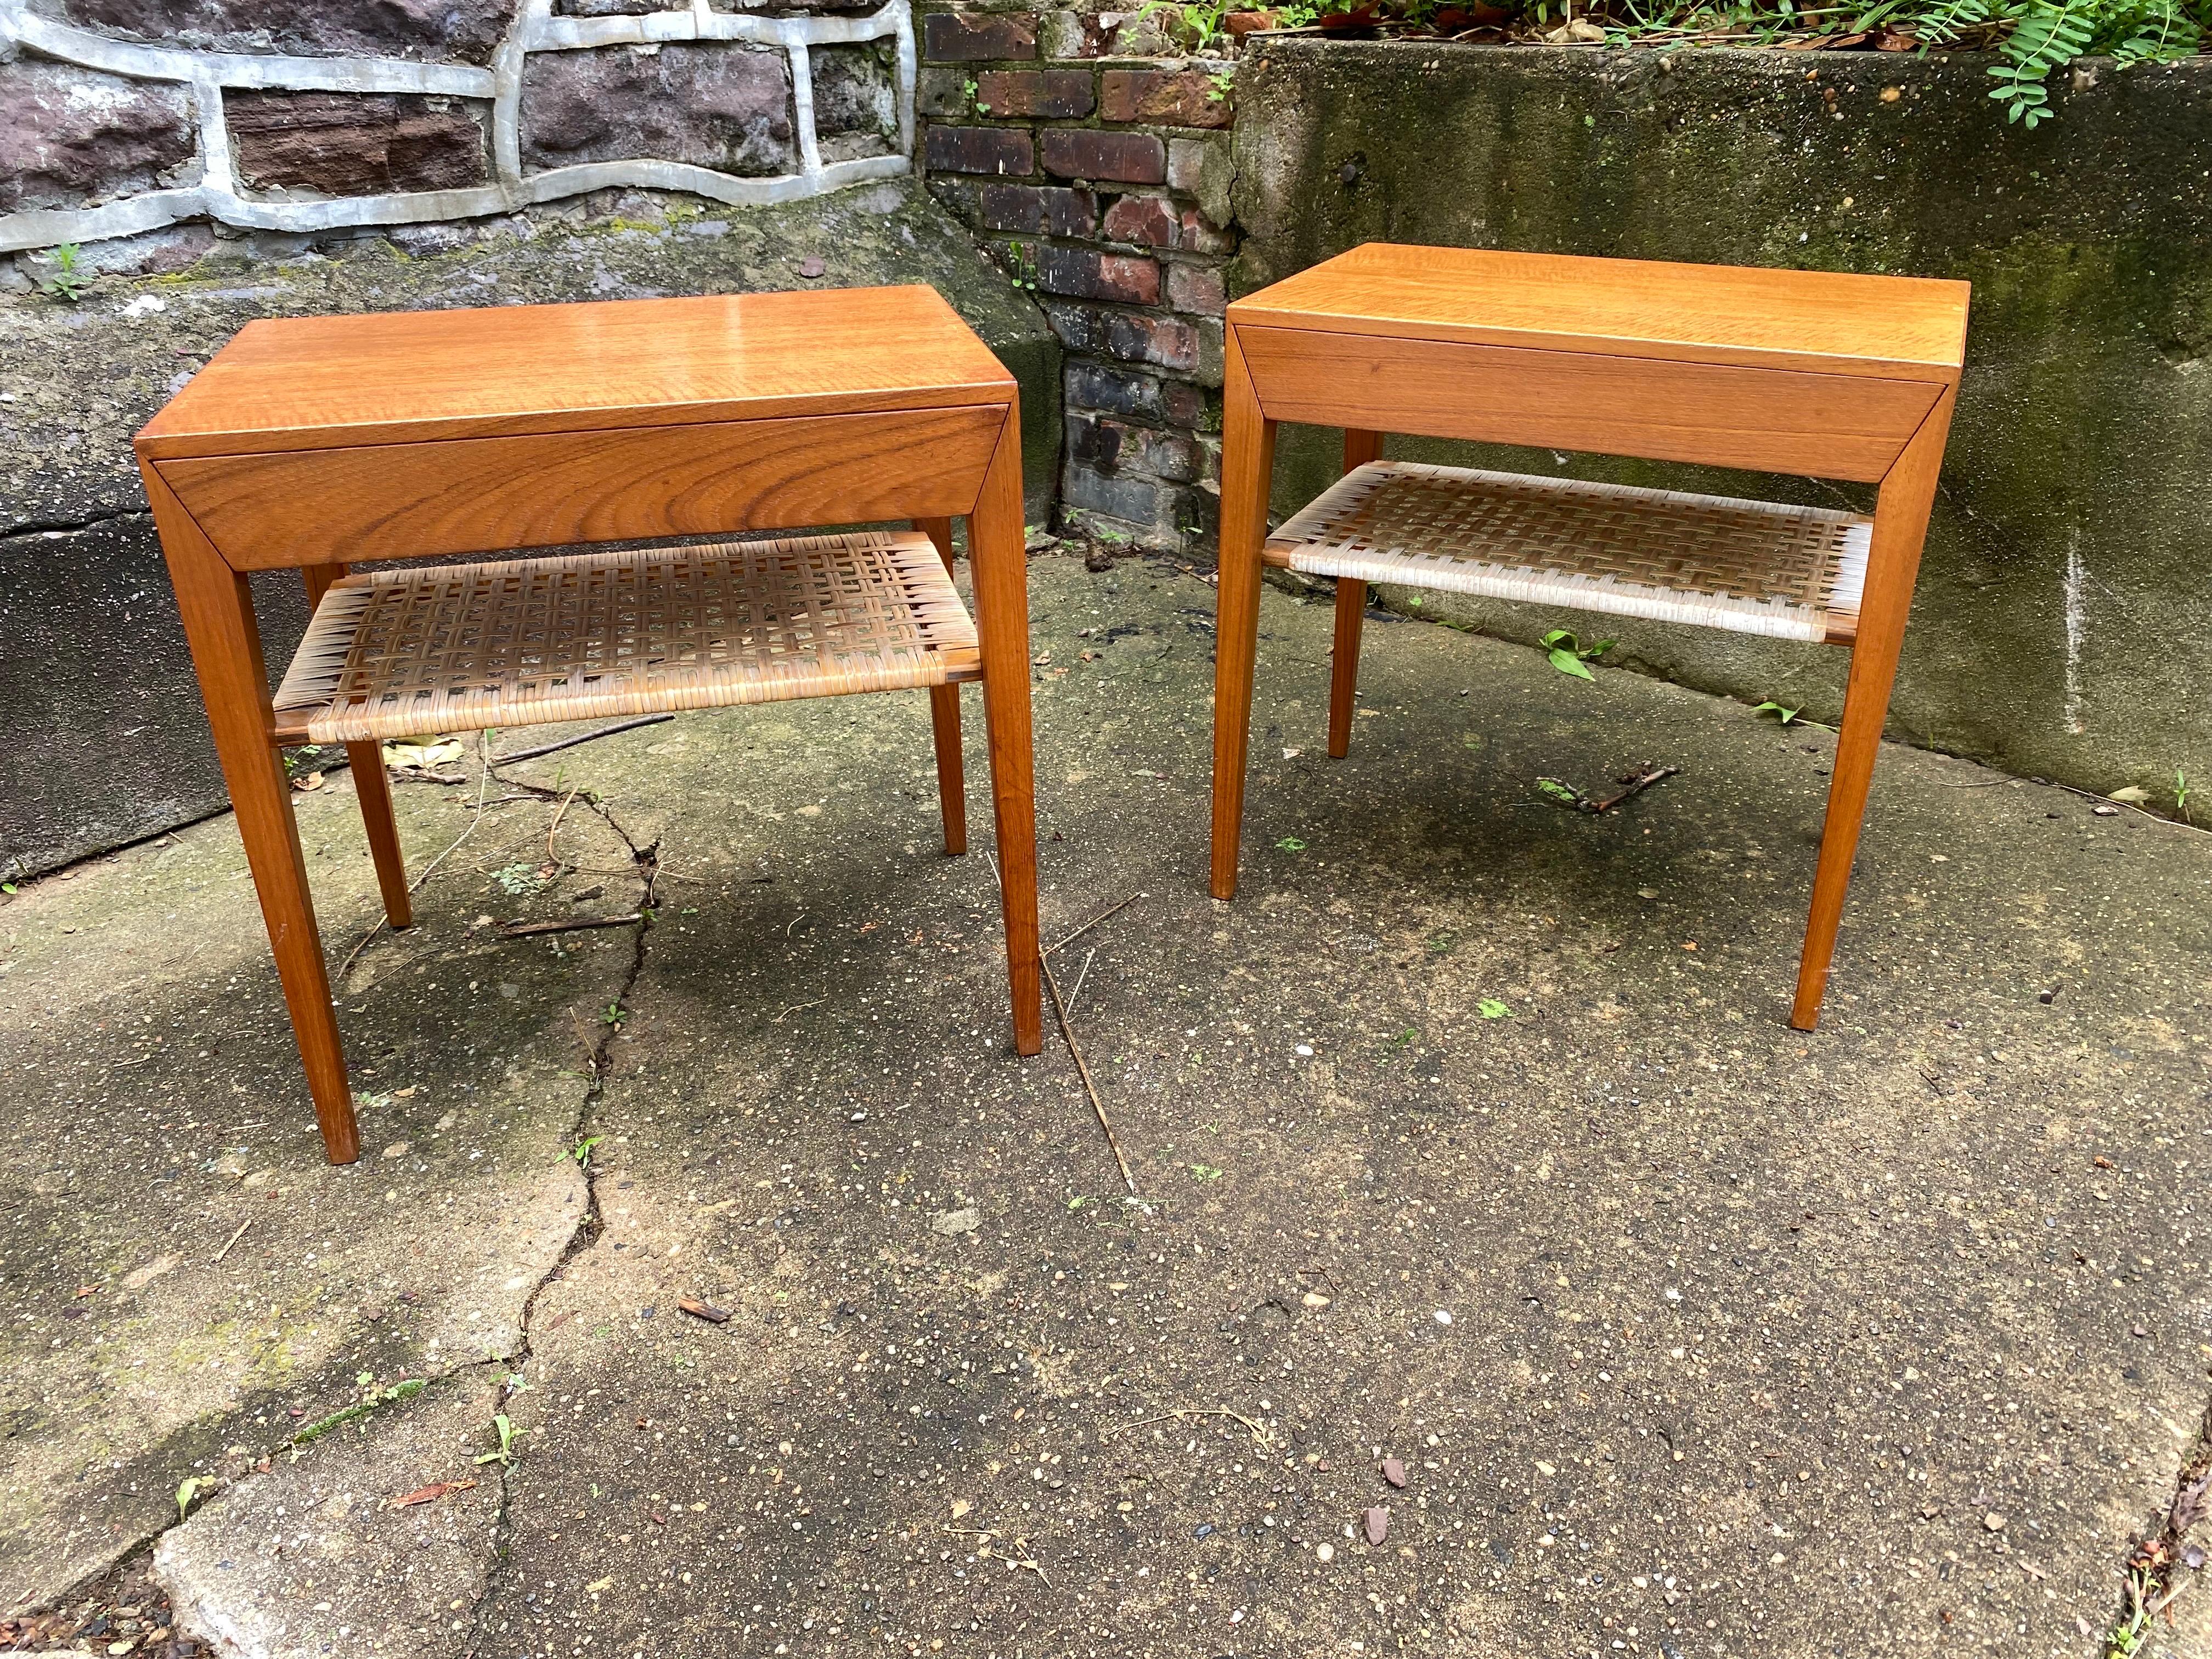 Severin Hansen Pair of Teak Night Tables with Caned shelfs. Very nice condition, tops have been refinished and tables cleaned and oiled. Caning in very good shape with no rips or breaks. Hansen designed an entire series of desks and tables with the